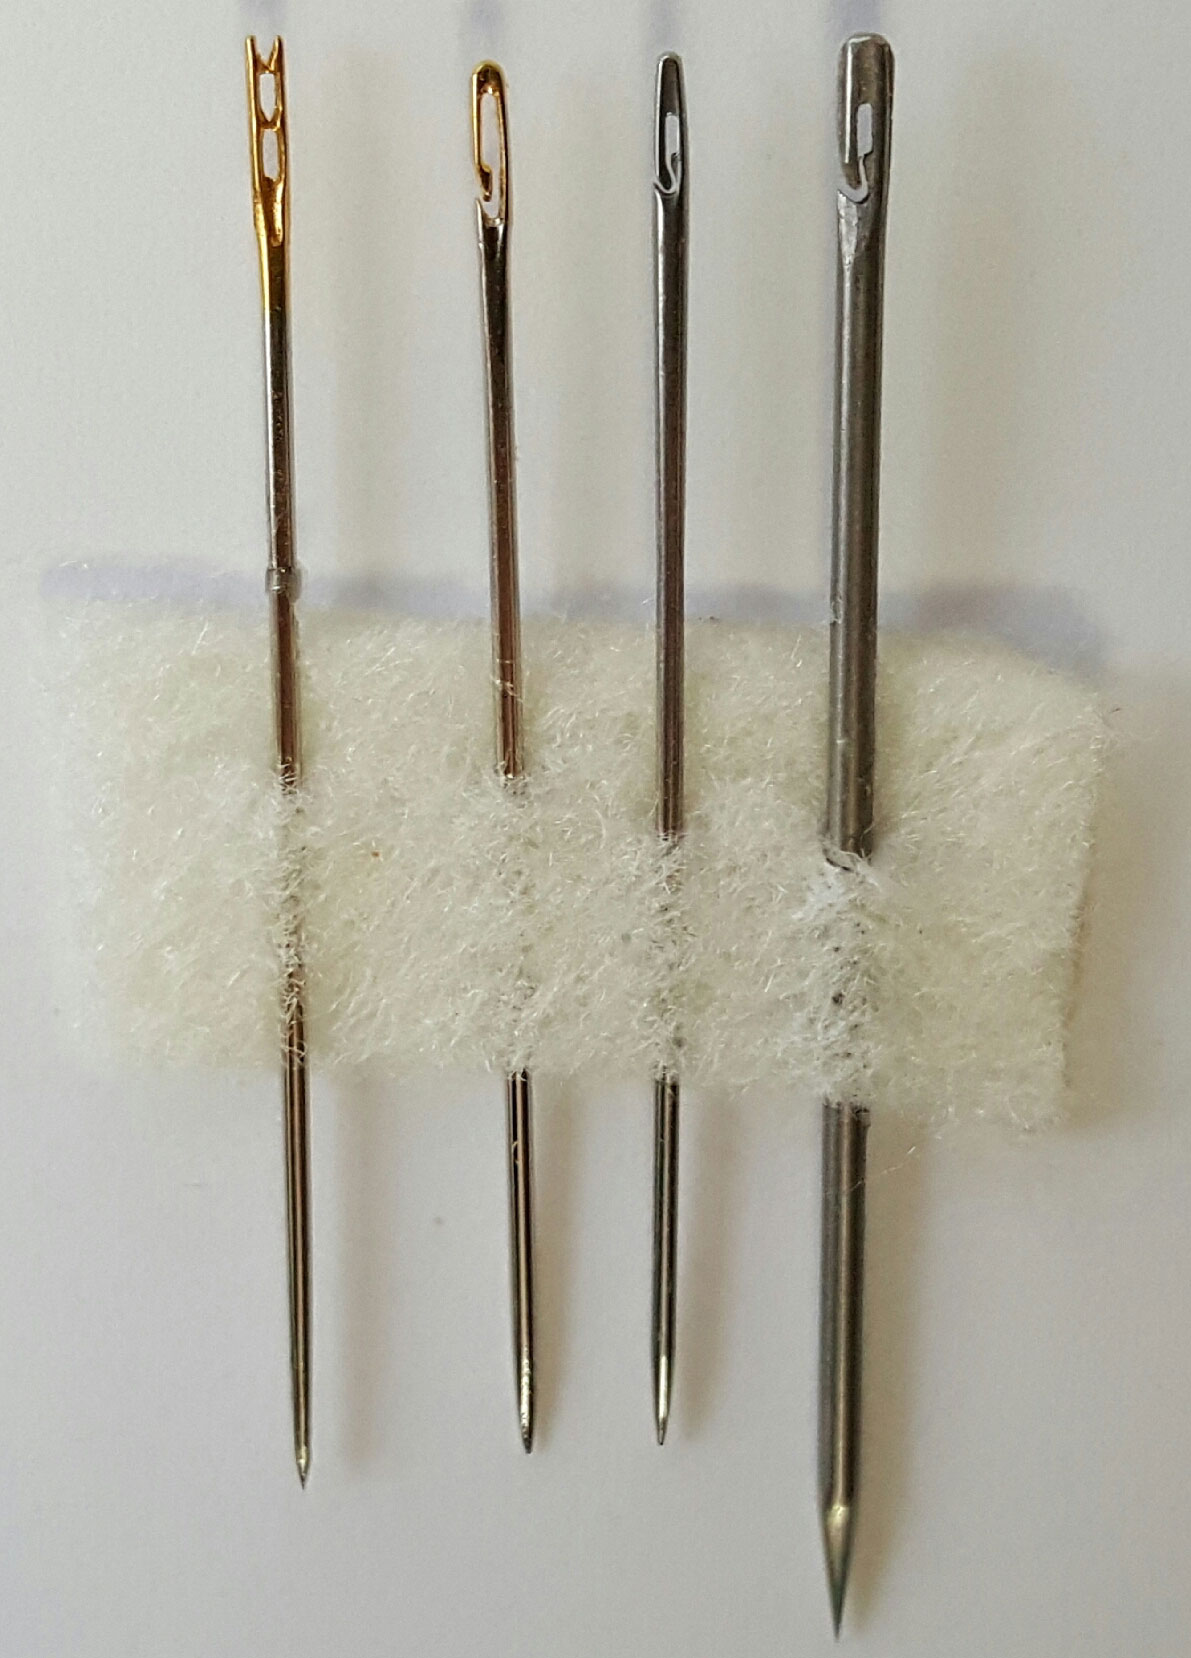 Side by side comparison of easy threading needles